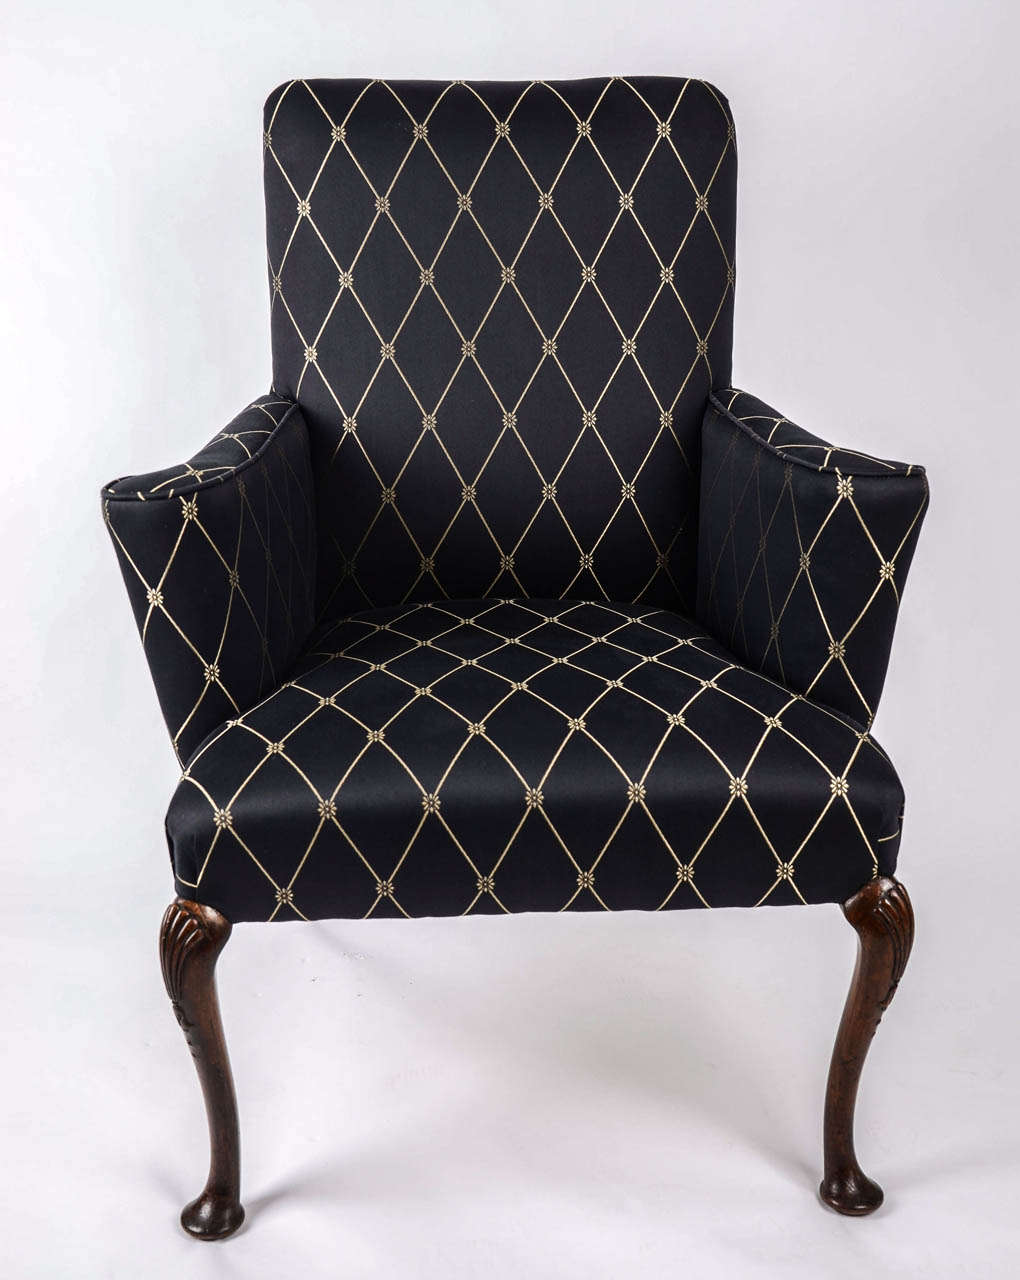 This is a very fine quality English, walnut, wing arm chair from the early years of the 18th century, George the first period, circa 1720.

Chairs from this very early Georgian period tend to have excellent shape and proportions.
This chair has